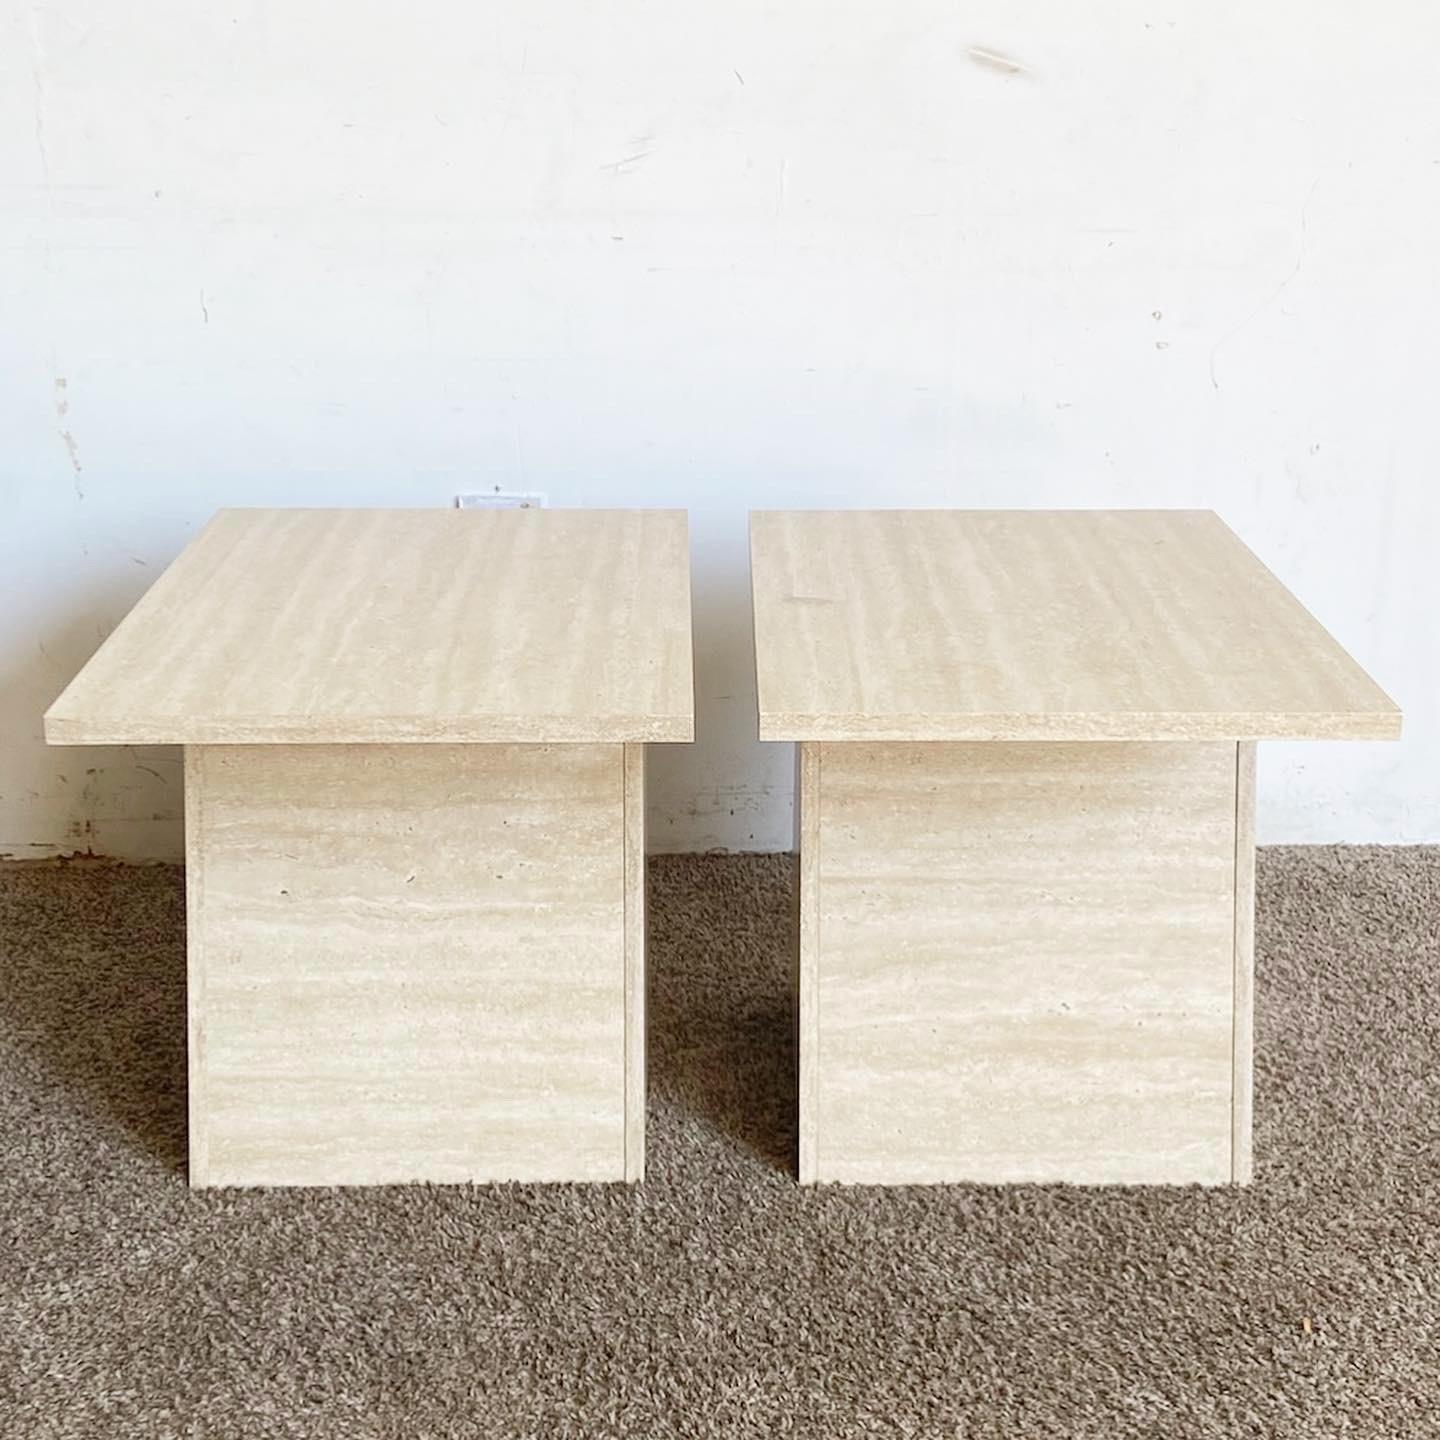 Upgrade your interior with these Postmodern Faux Travertine Laminate Side Tables. Designed to mimic genuine travertine, this pair of tables blends luxury and affordability, all in a sleek, minimalist design.
Minor wear around the edges as seen in